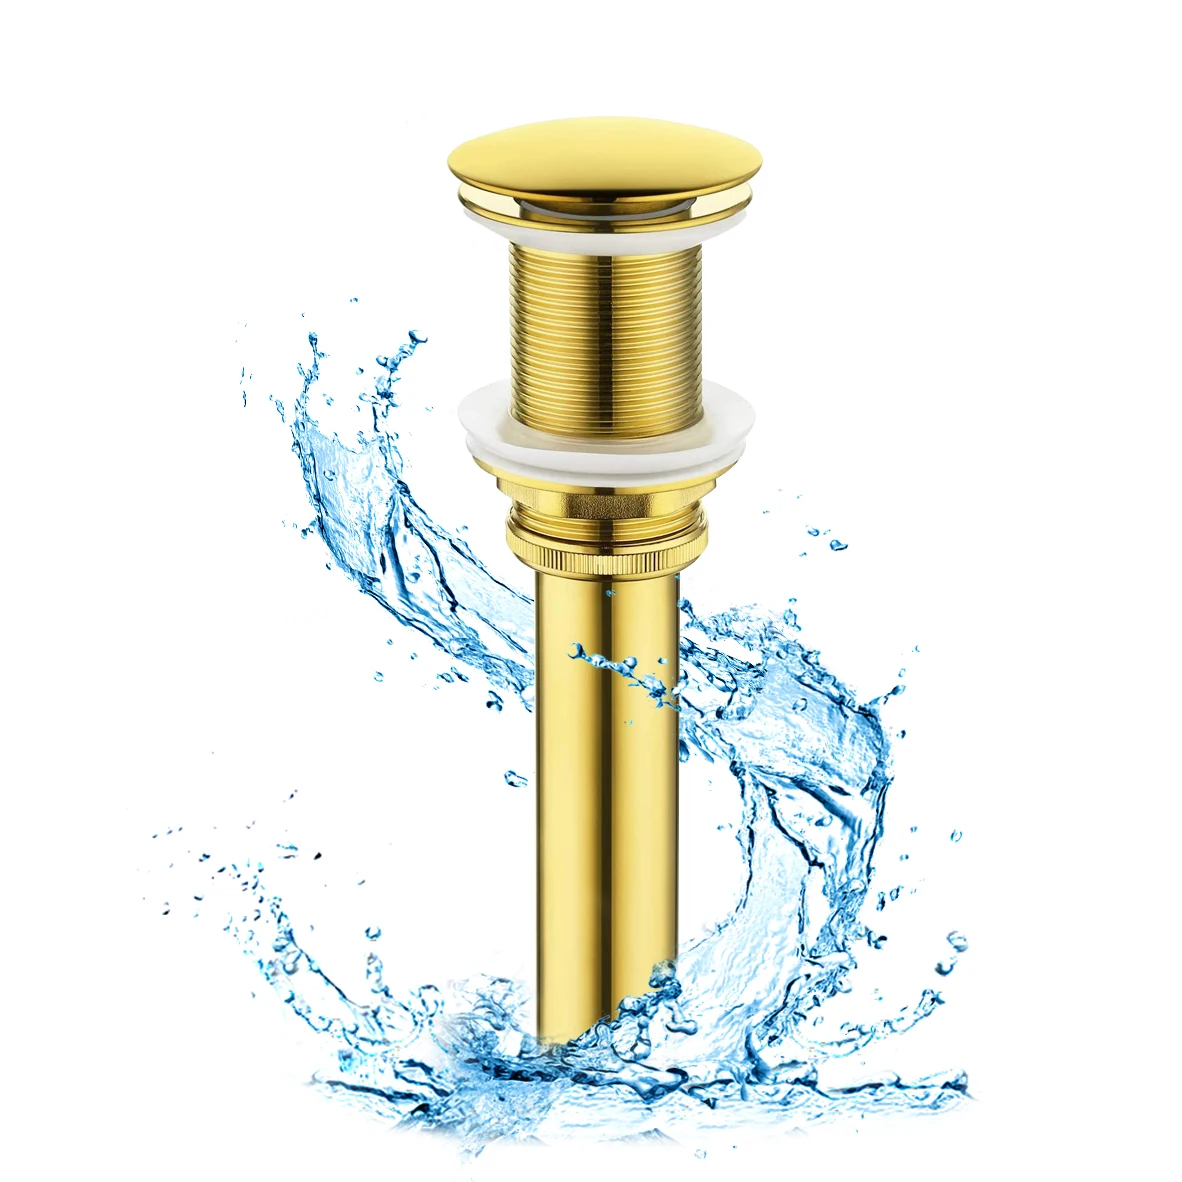 

Gold Pop Up Drain Button Bathroom Basin Sink Waterlet High Quality Click-clack Pop up With Overflow Hole Desighn Easy Clean